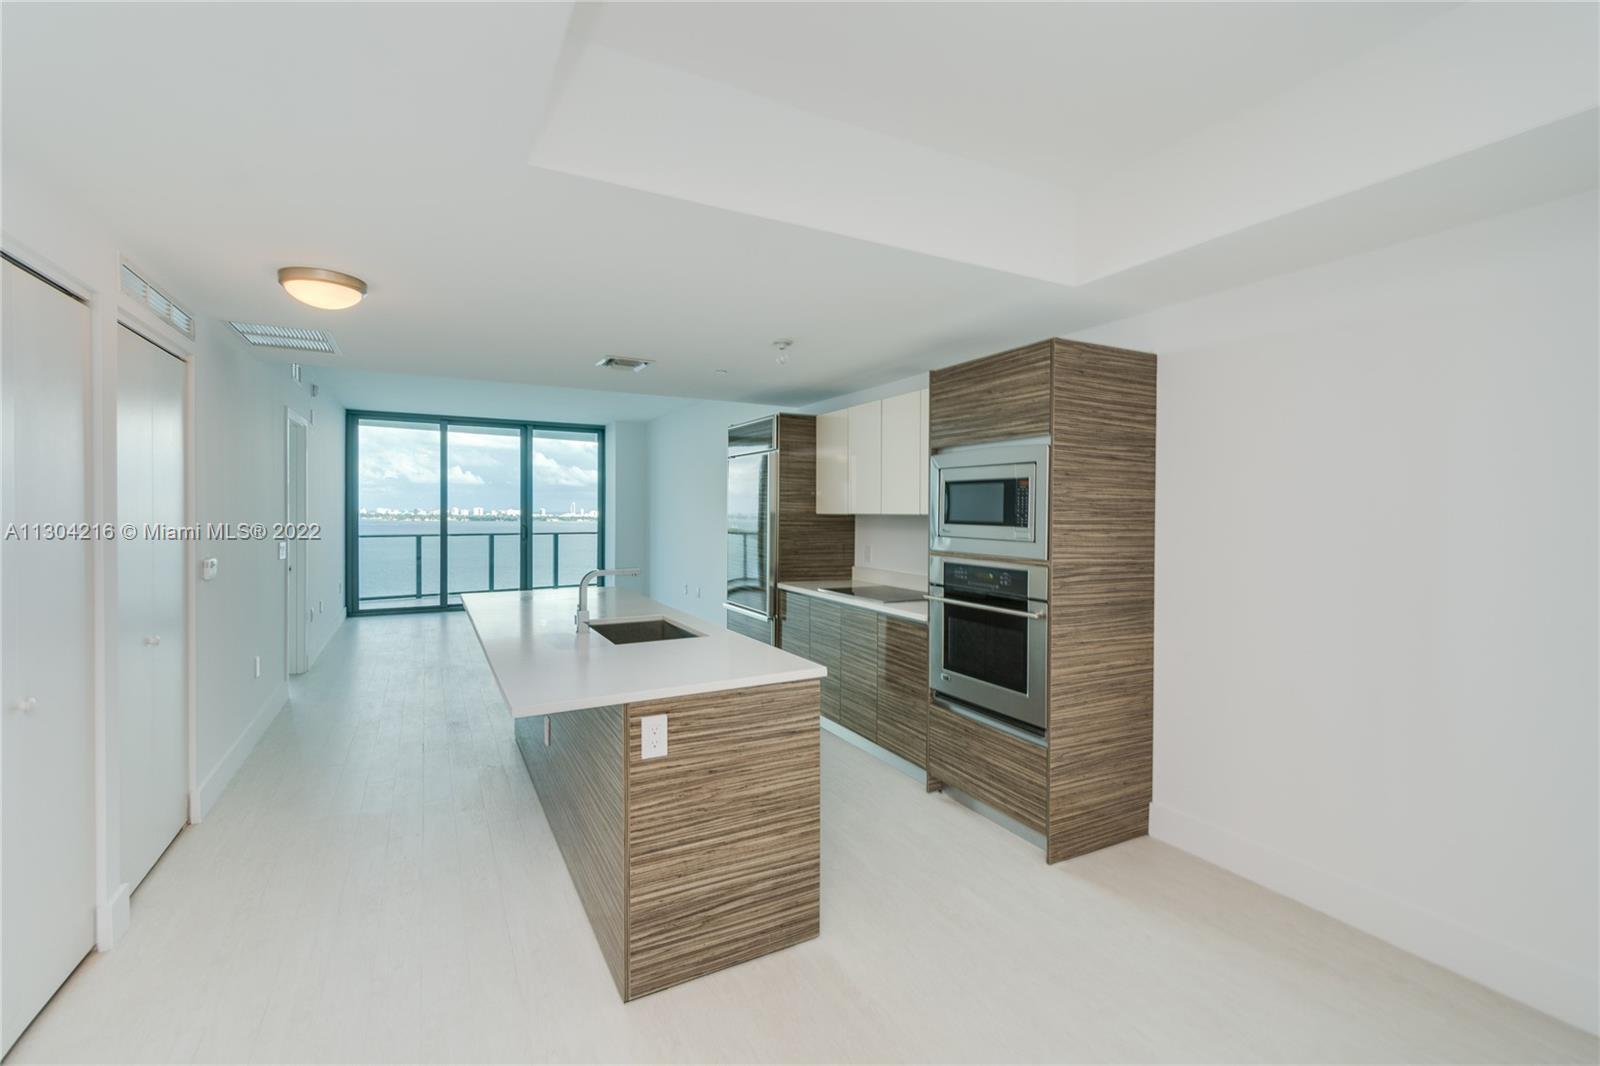 Spectacular views from the 22nd floor of Icon Bay Condominium! Tile floor throughout, 2 beds + 2 Bat